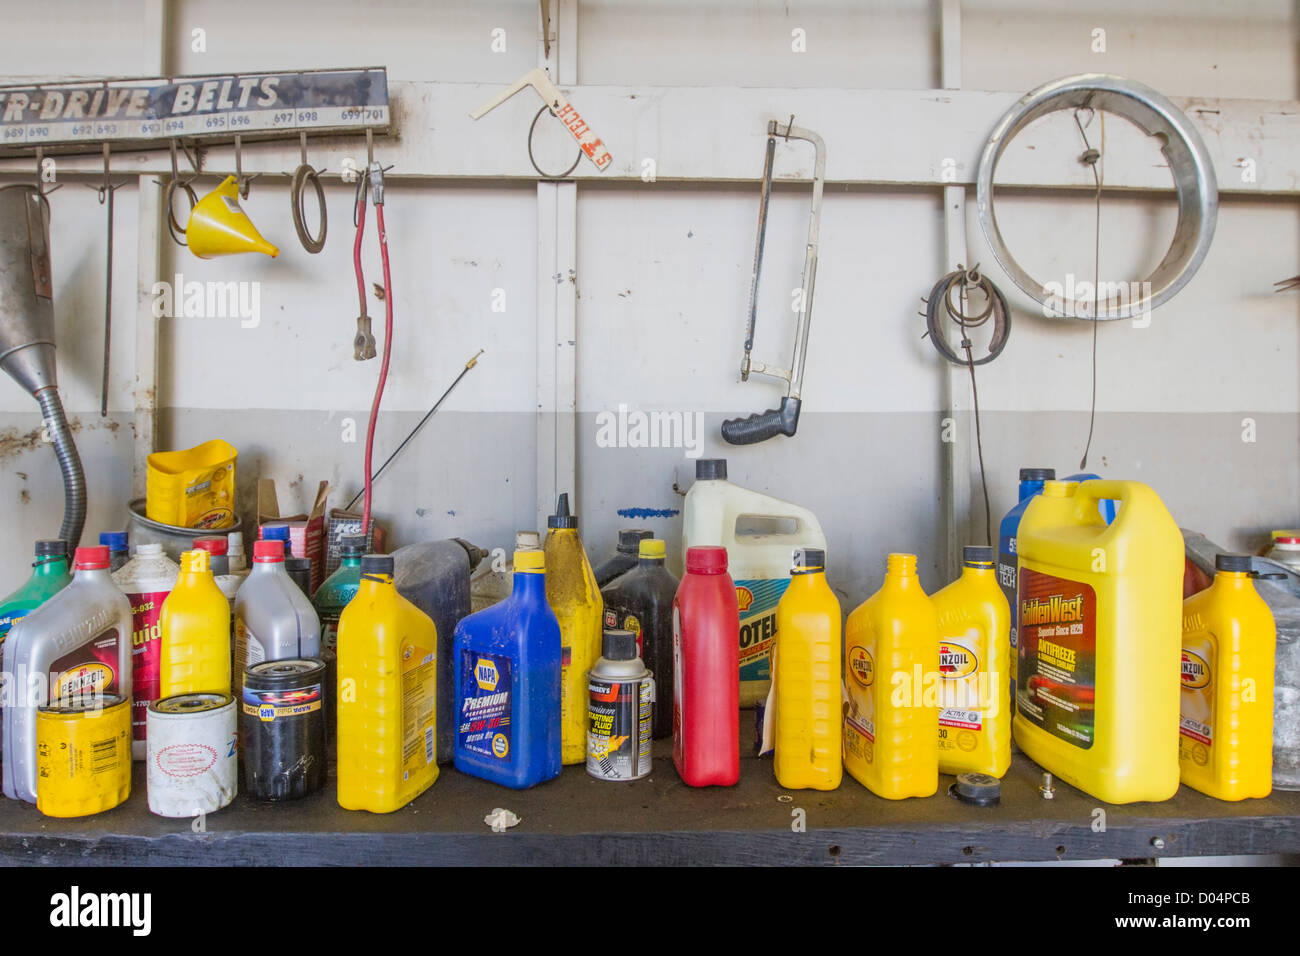 Oil cans in a car garage. Stock Photo